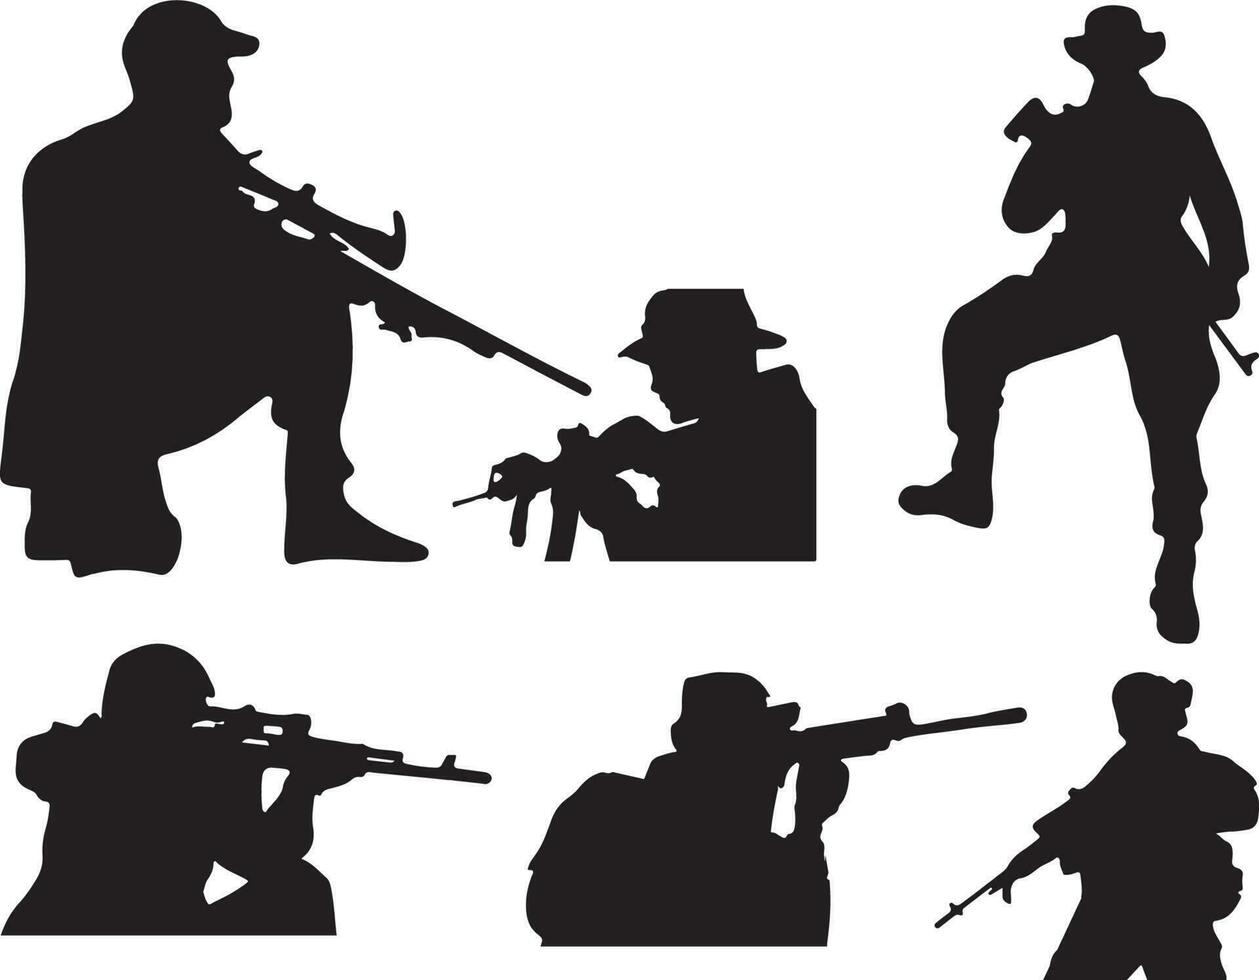 Armed forces high quality detailed silhouette of military army soldier. vector